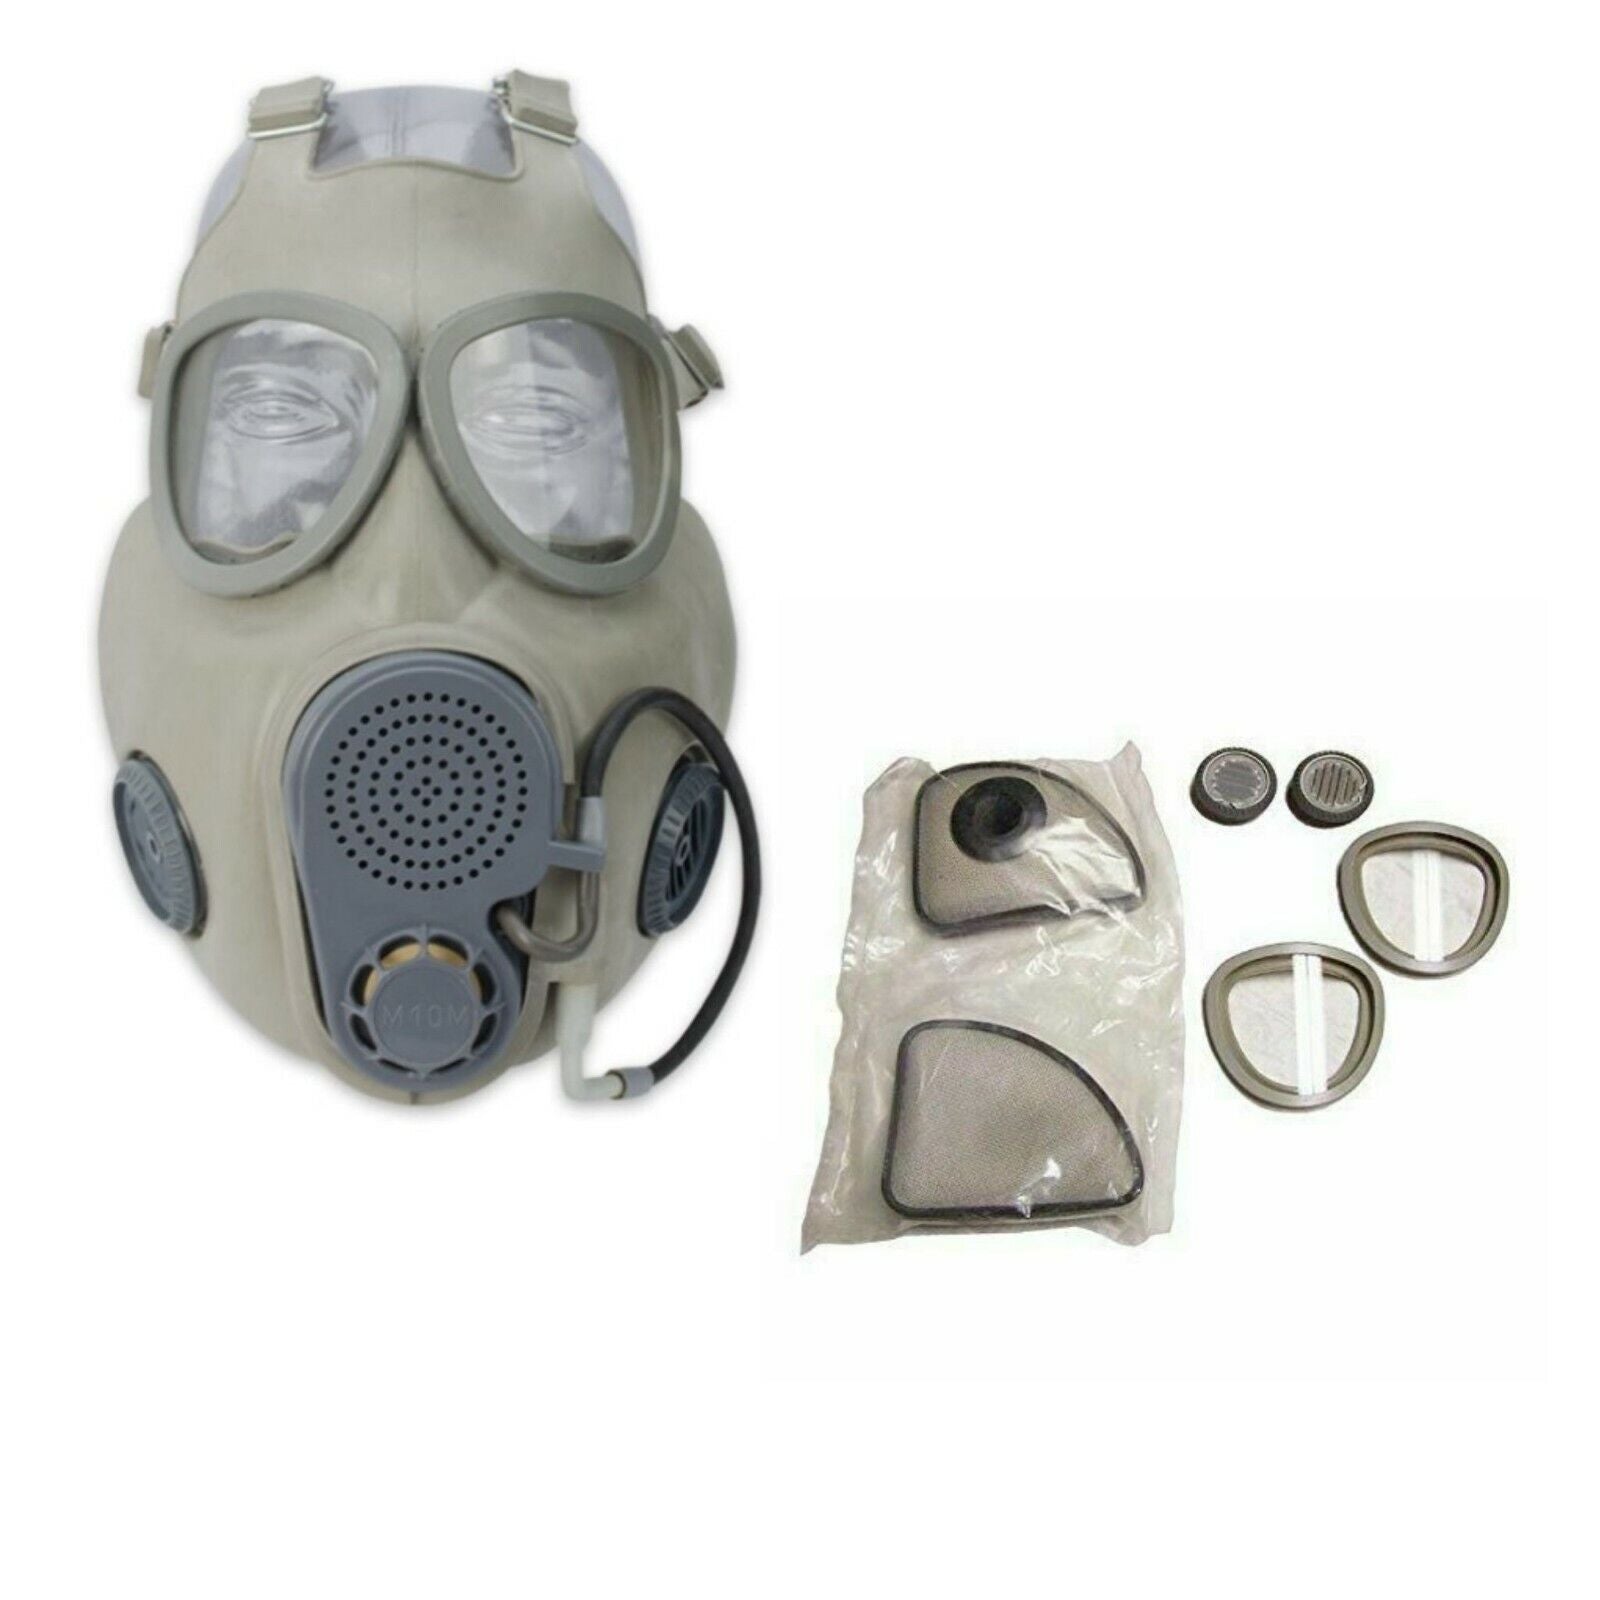 CZECH GAS MASK M10M MASK ONLY TO COMPLETE SET